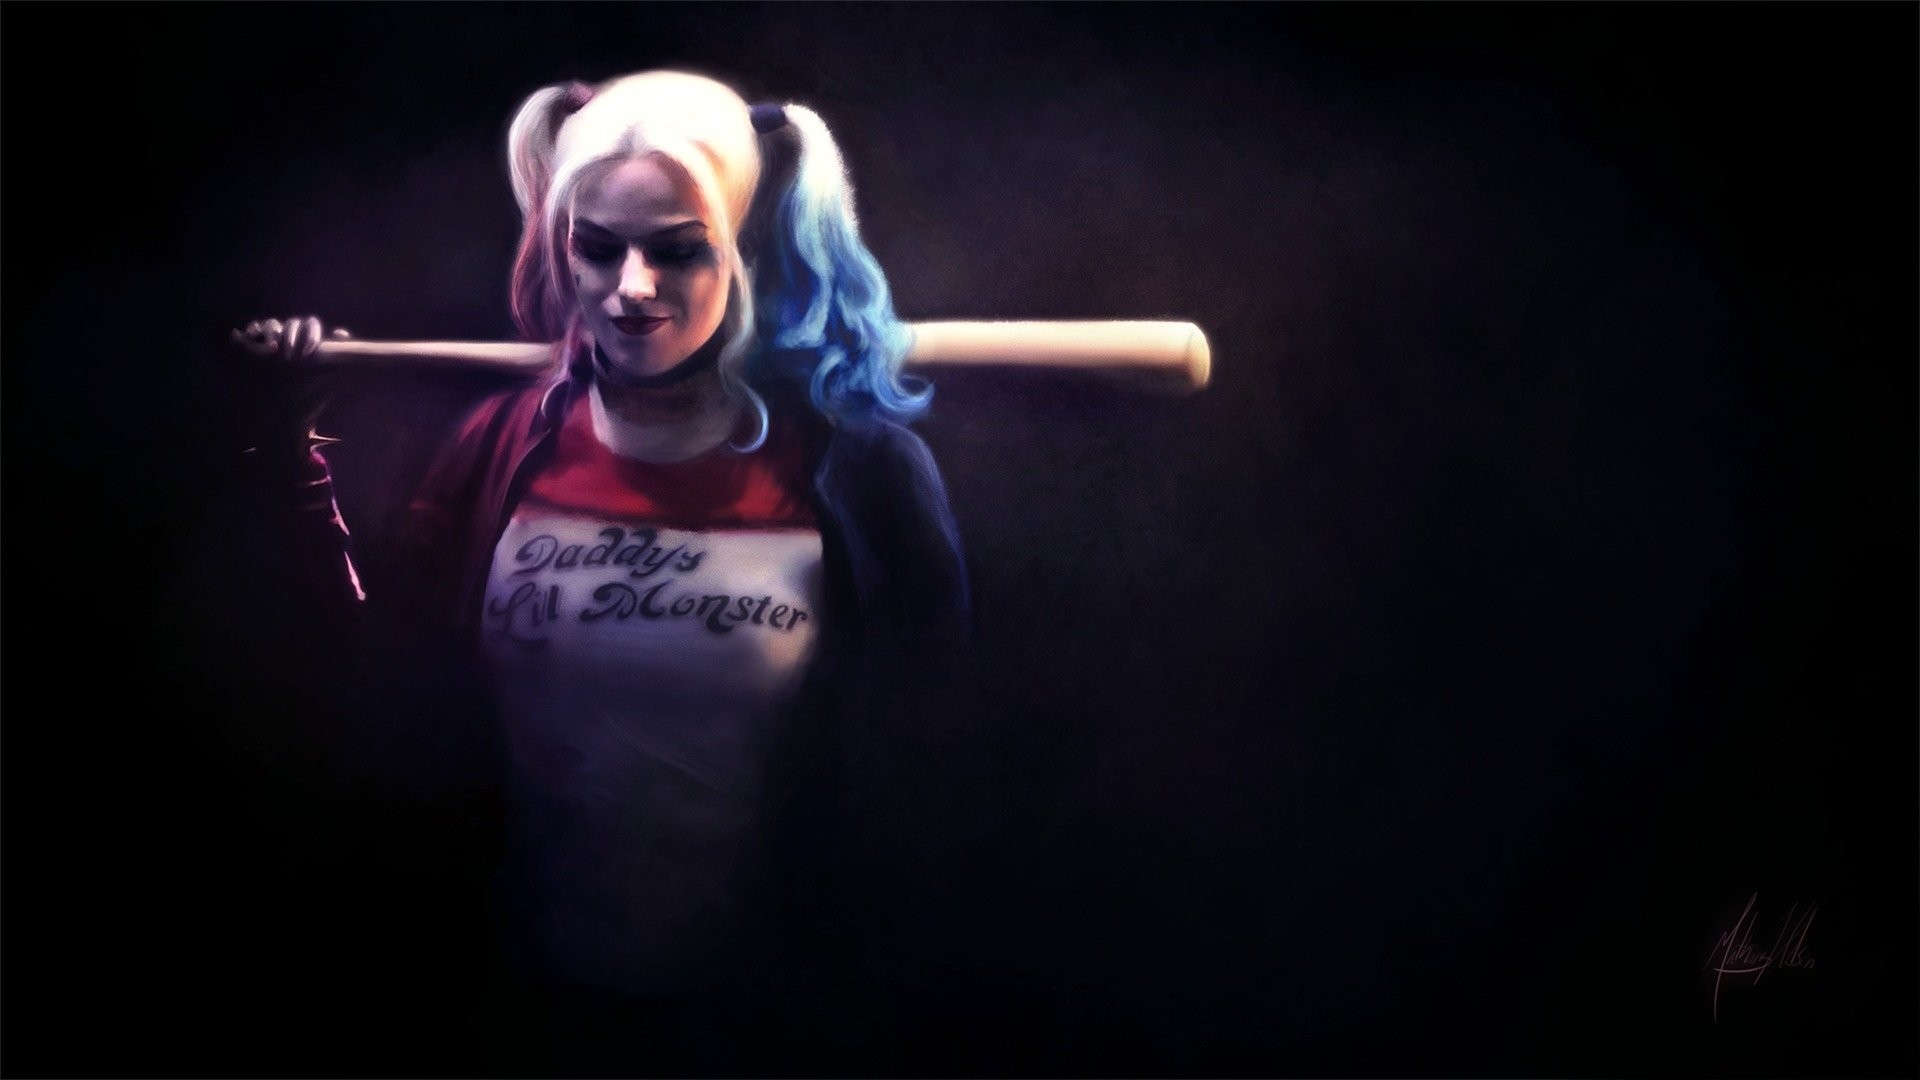 Desktop Wallpaper Harley Quinn The Movie with image resolution 1920x1080 pixel. You can use this wallpaper as background for your desktop Computer Screensavers, Android or iPhone smartphones